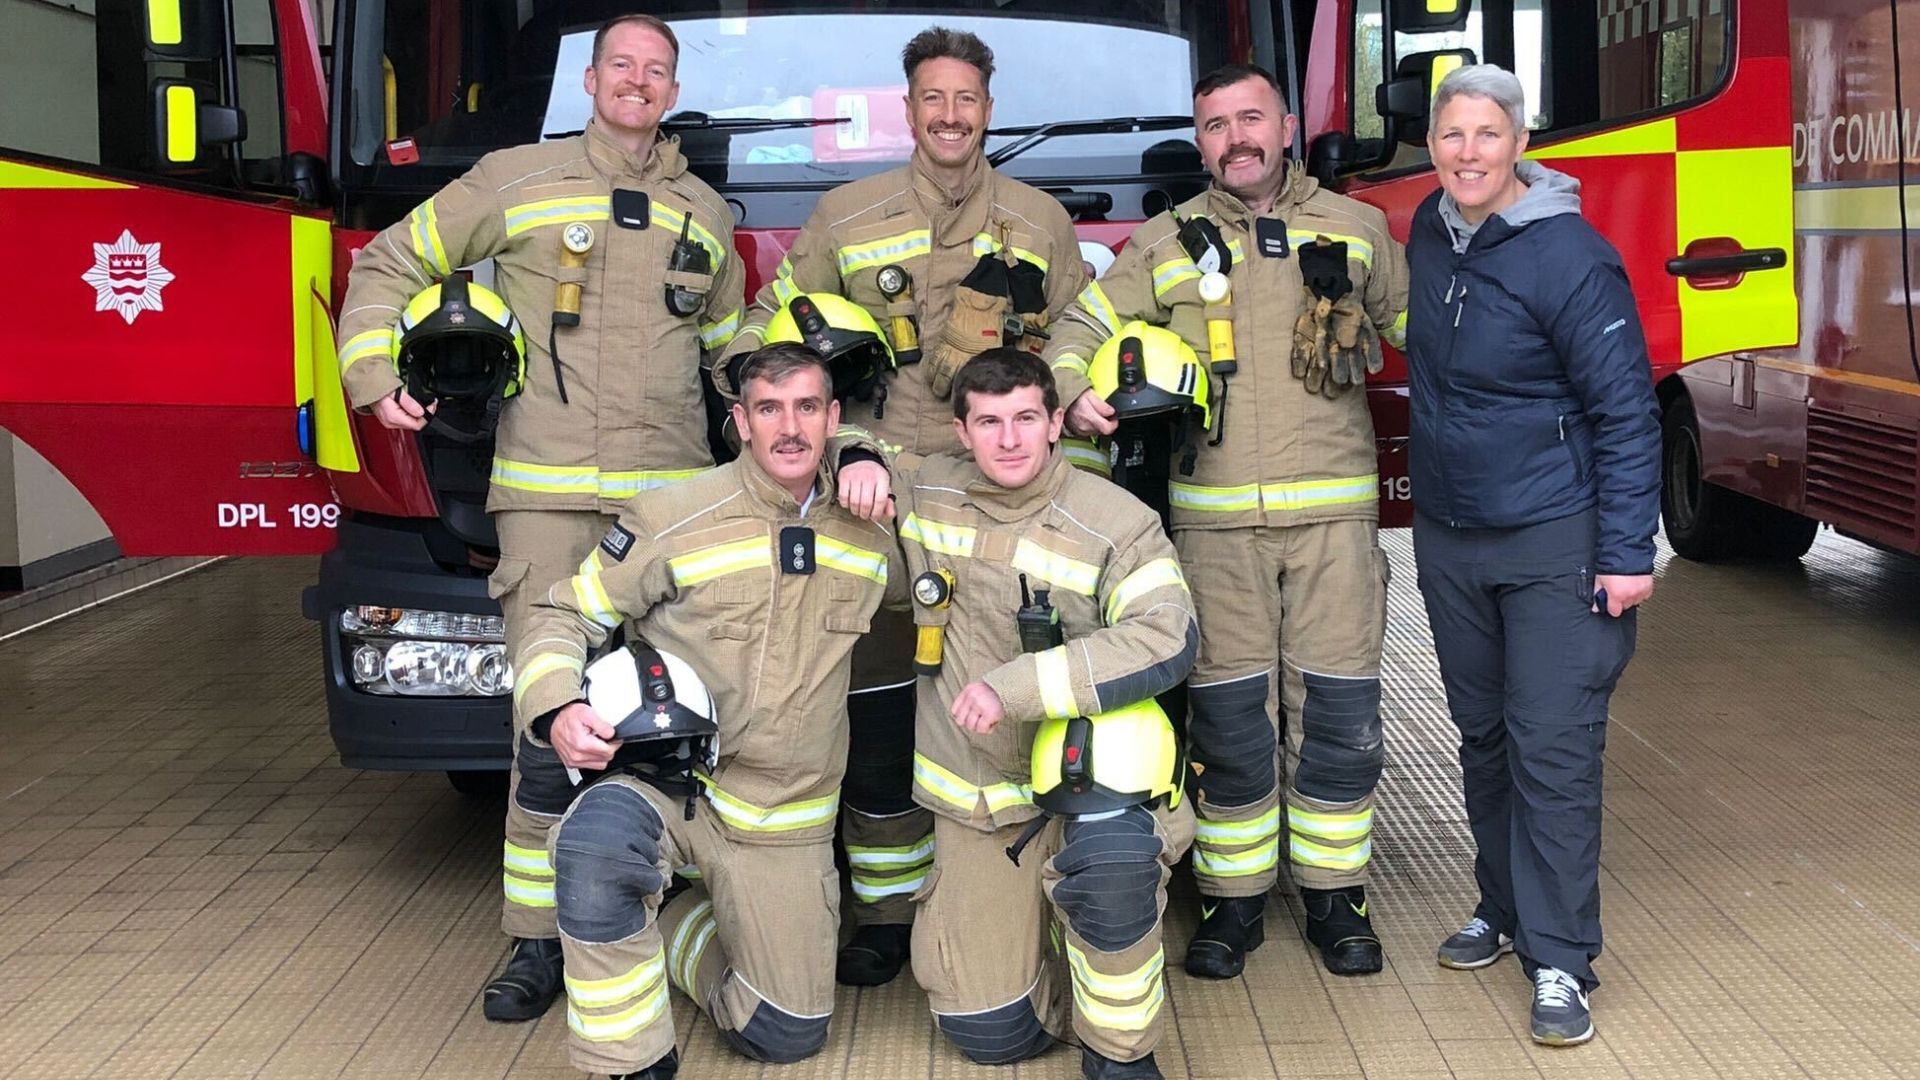 Fire brigades smiling in front of a fire engine